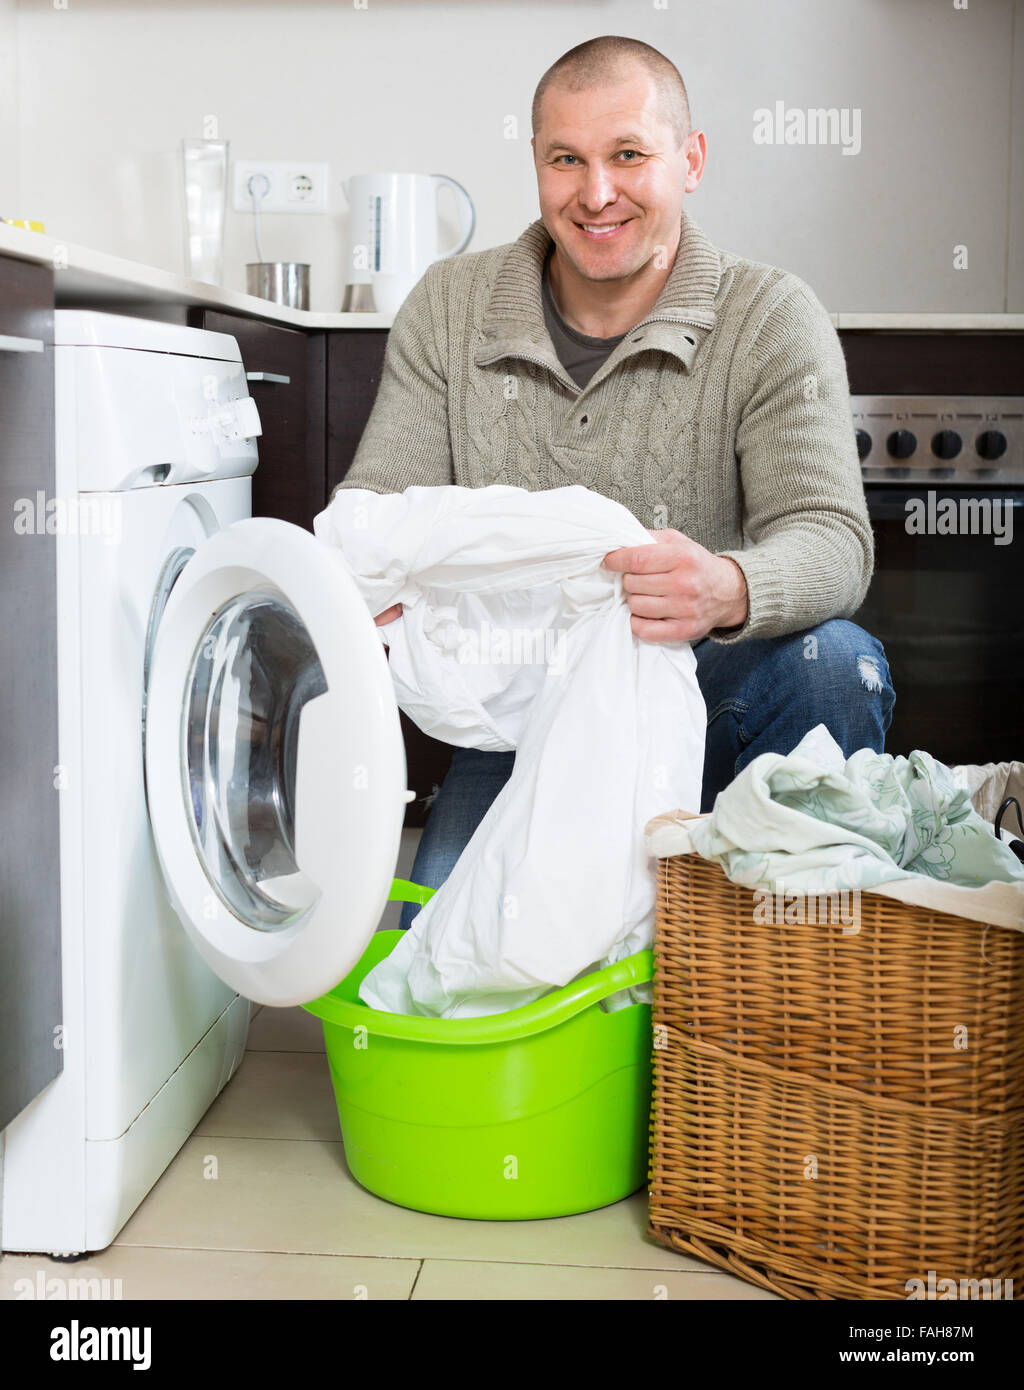 Home laundry. Smiling man using washing machine in kitchen at home Stock Photo